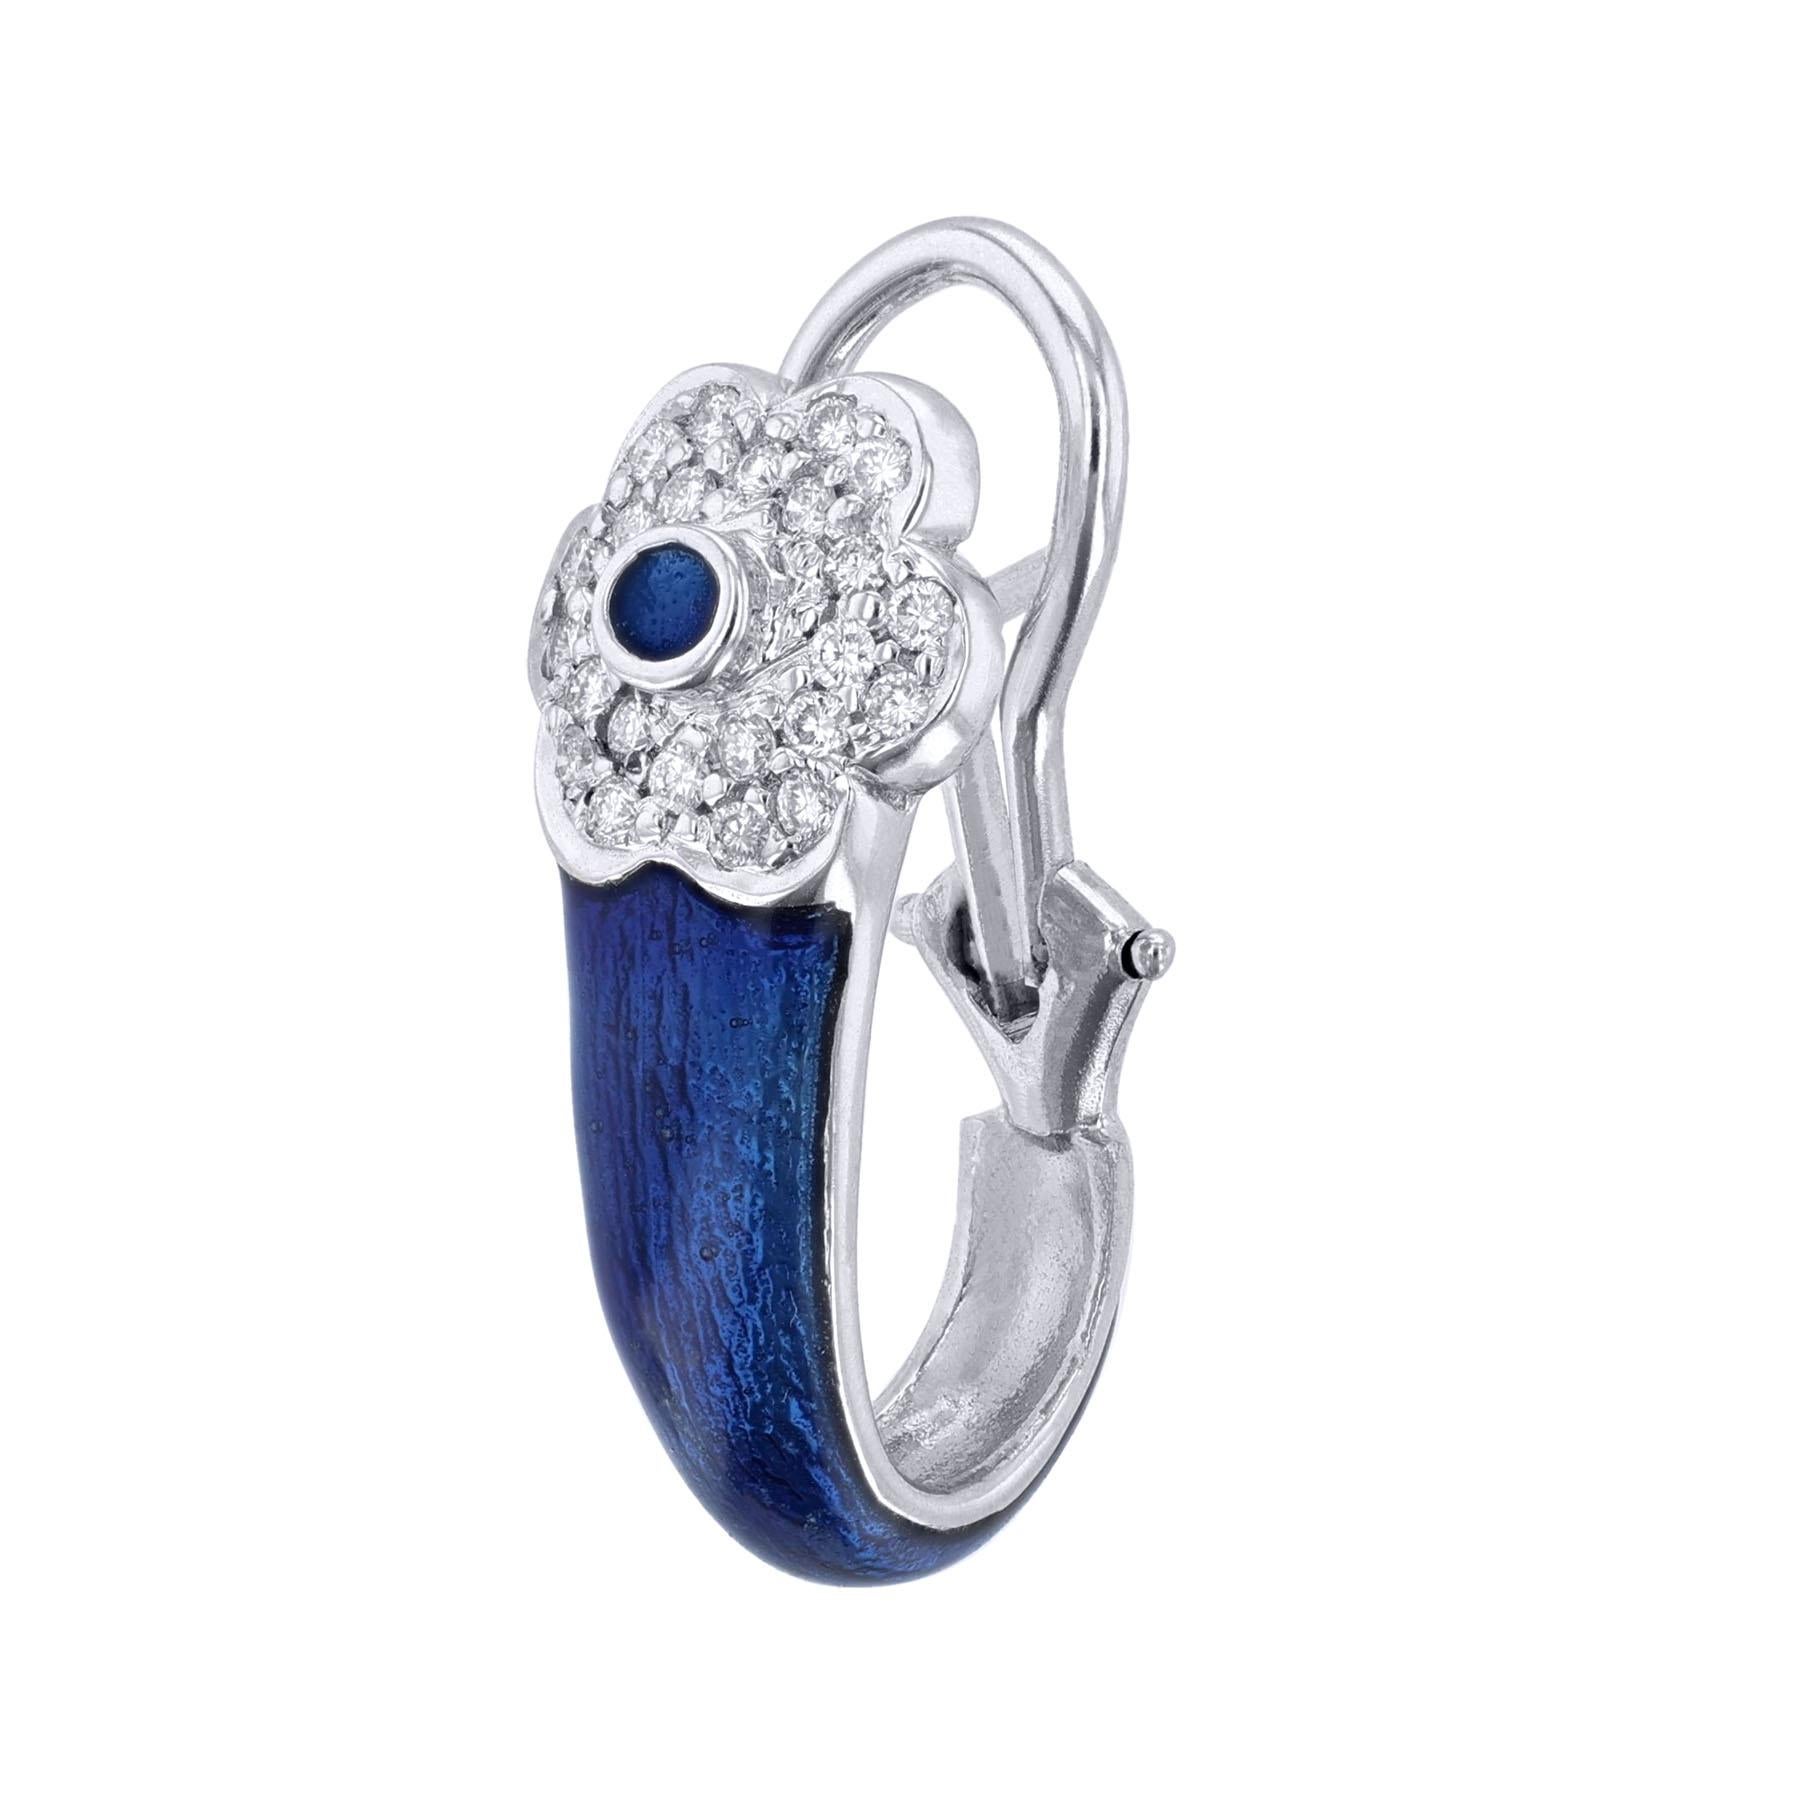 These clip on earrings are made in 18K white gold and blue enamel. It features a flower design with 0.48 carat diamonds.